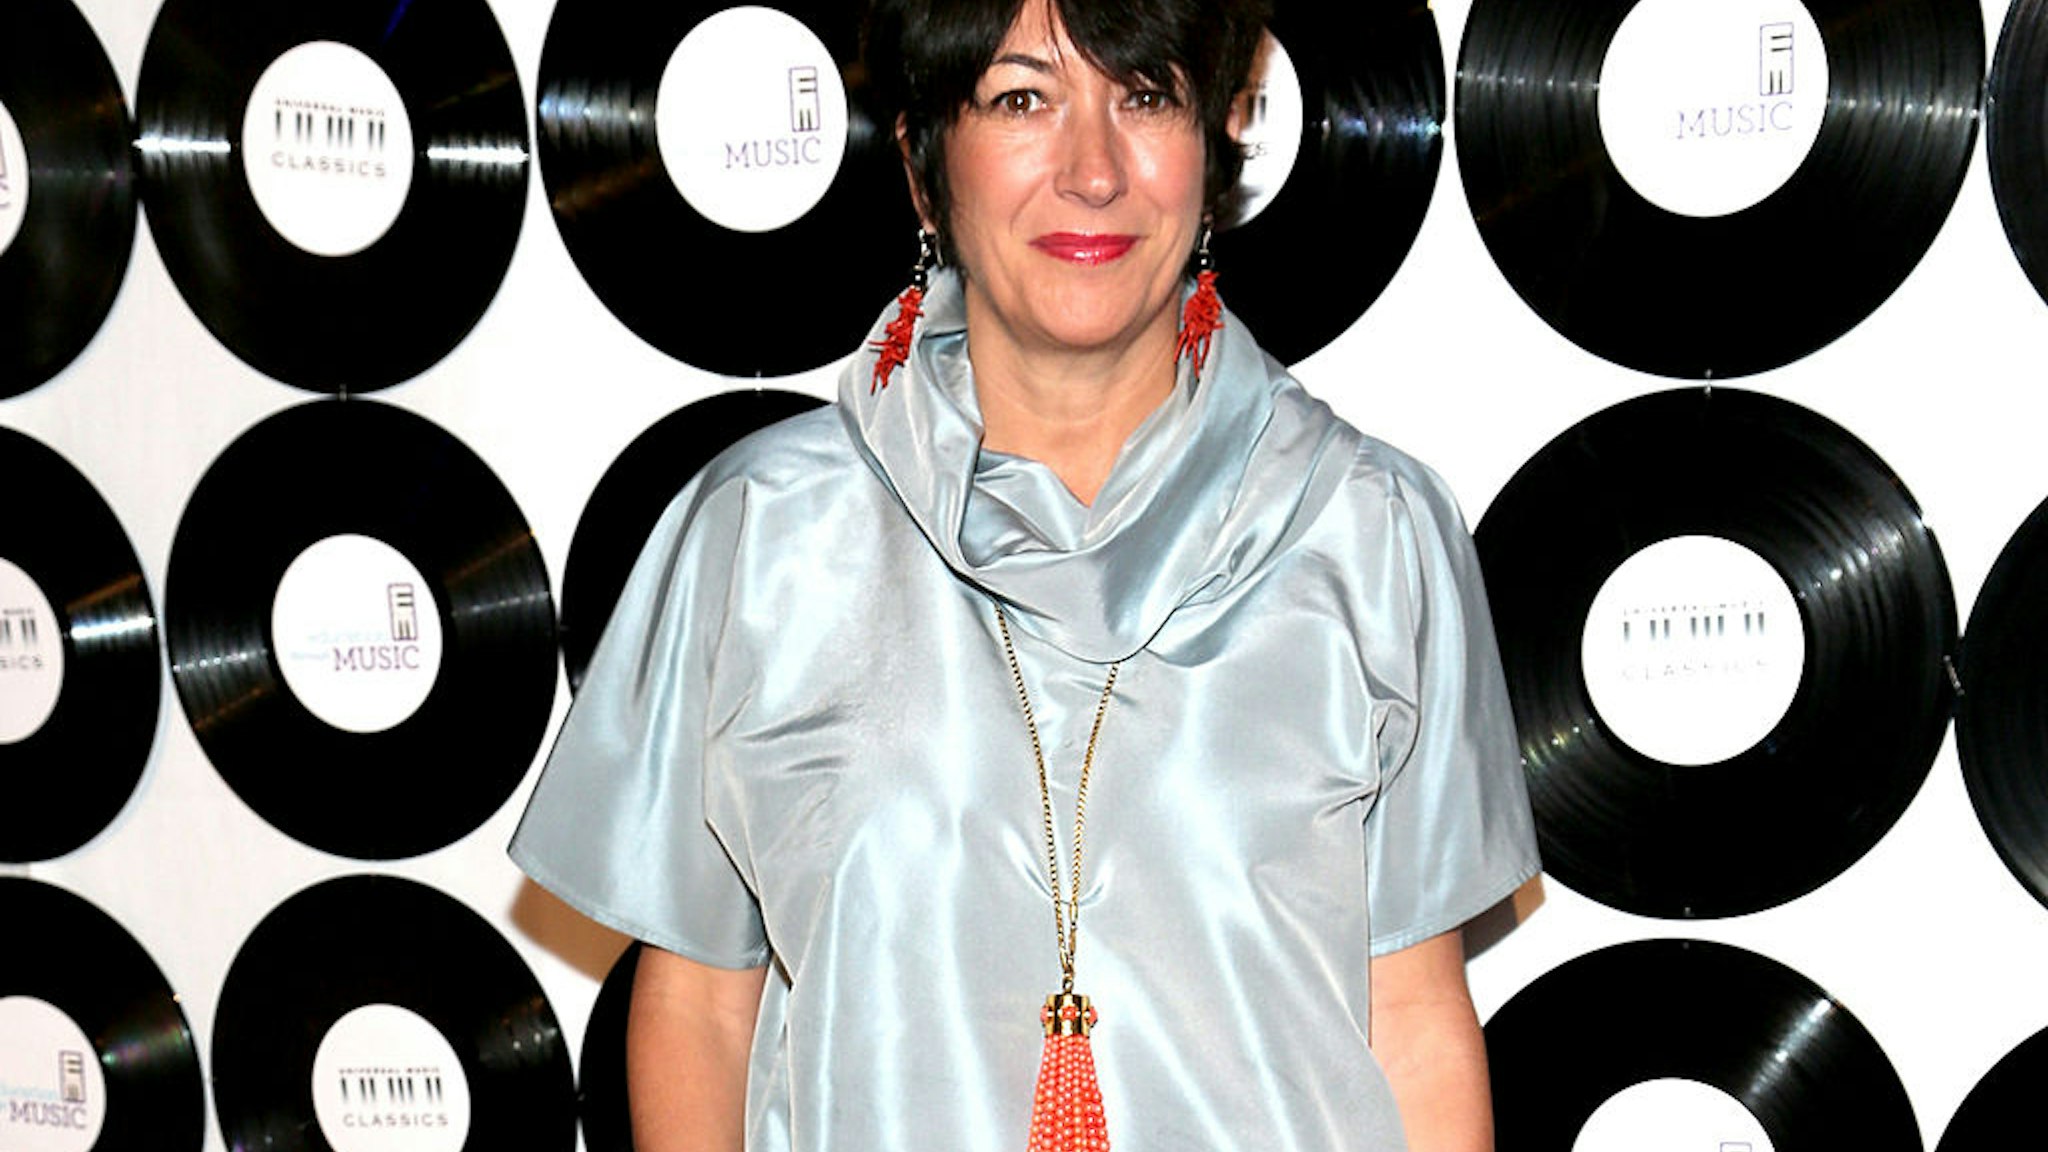 Ghislaine Maxwell attends the ETM 2014 Children's Benefit Gala at Capitale on May 6, 2014 in New York City.